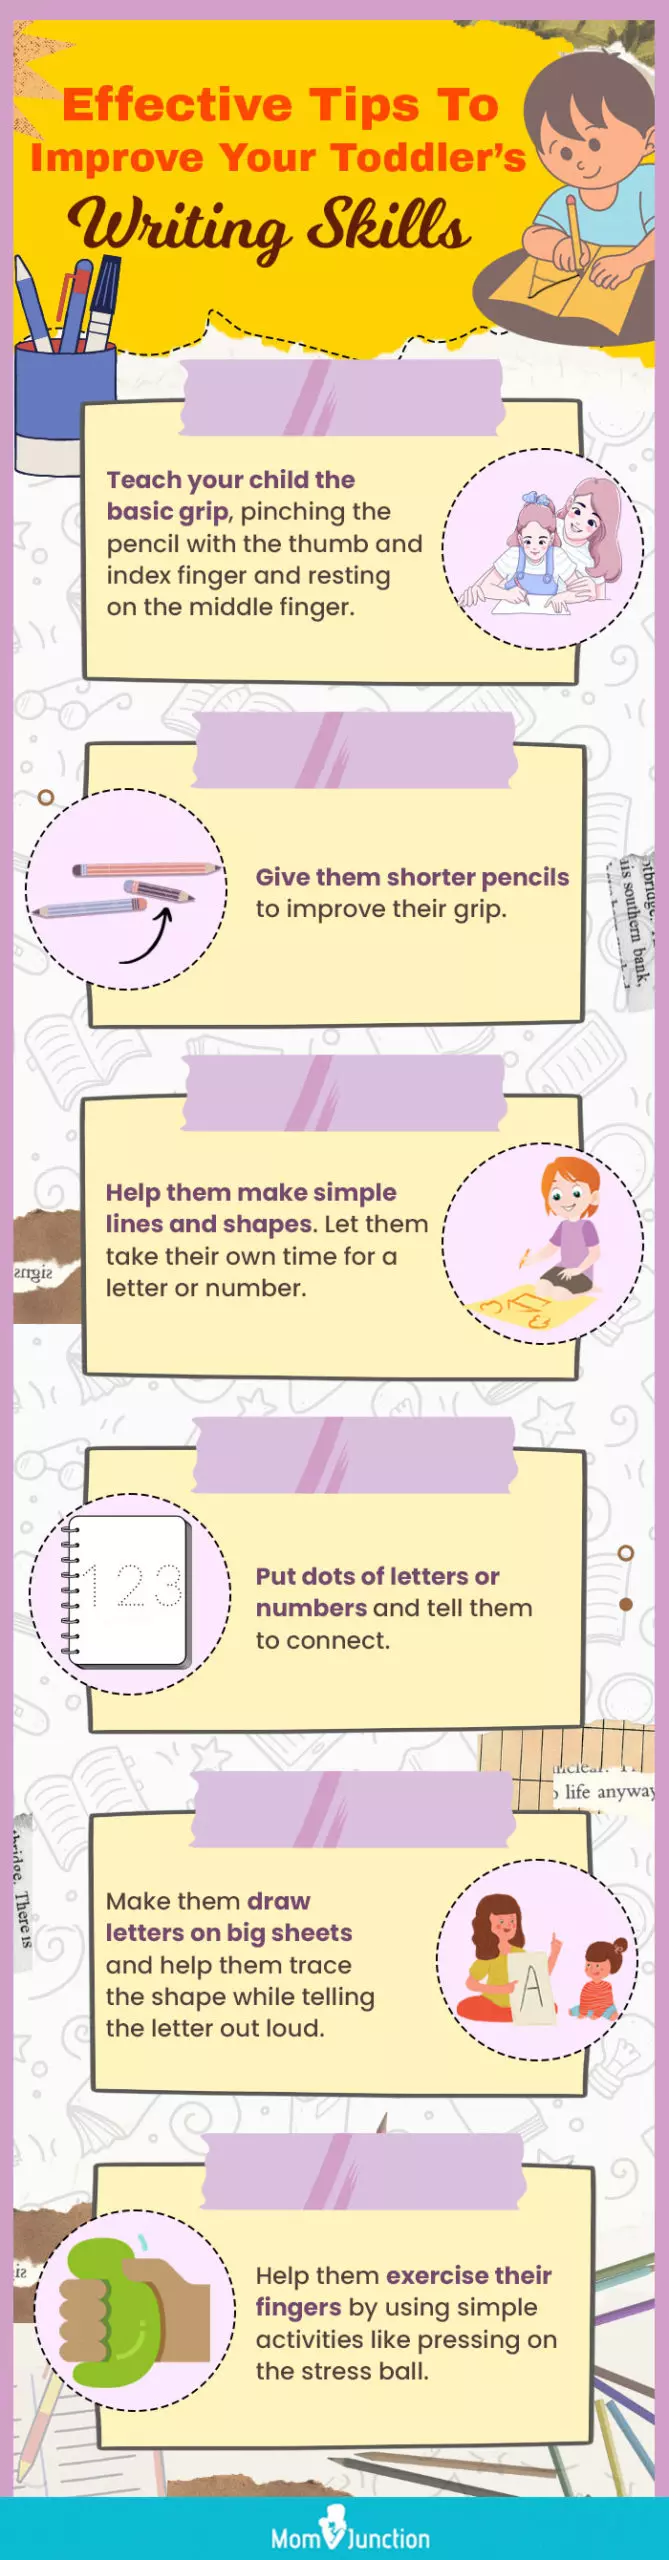 effective tips to improve your toddlers writing skills (infographic)